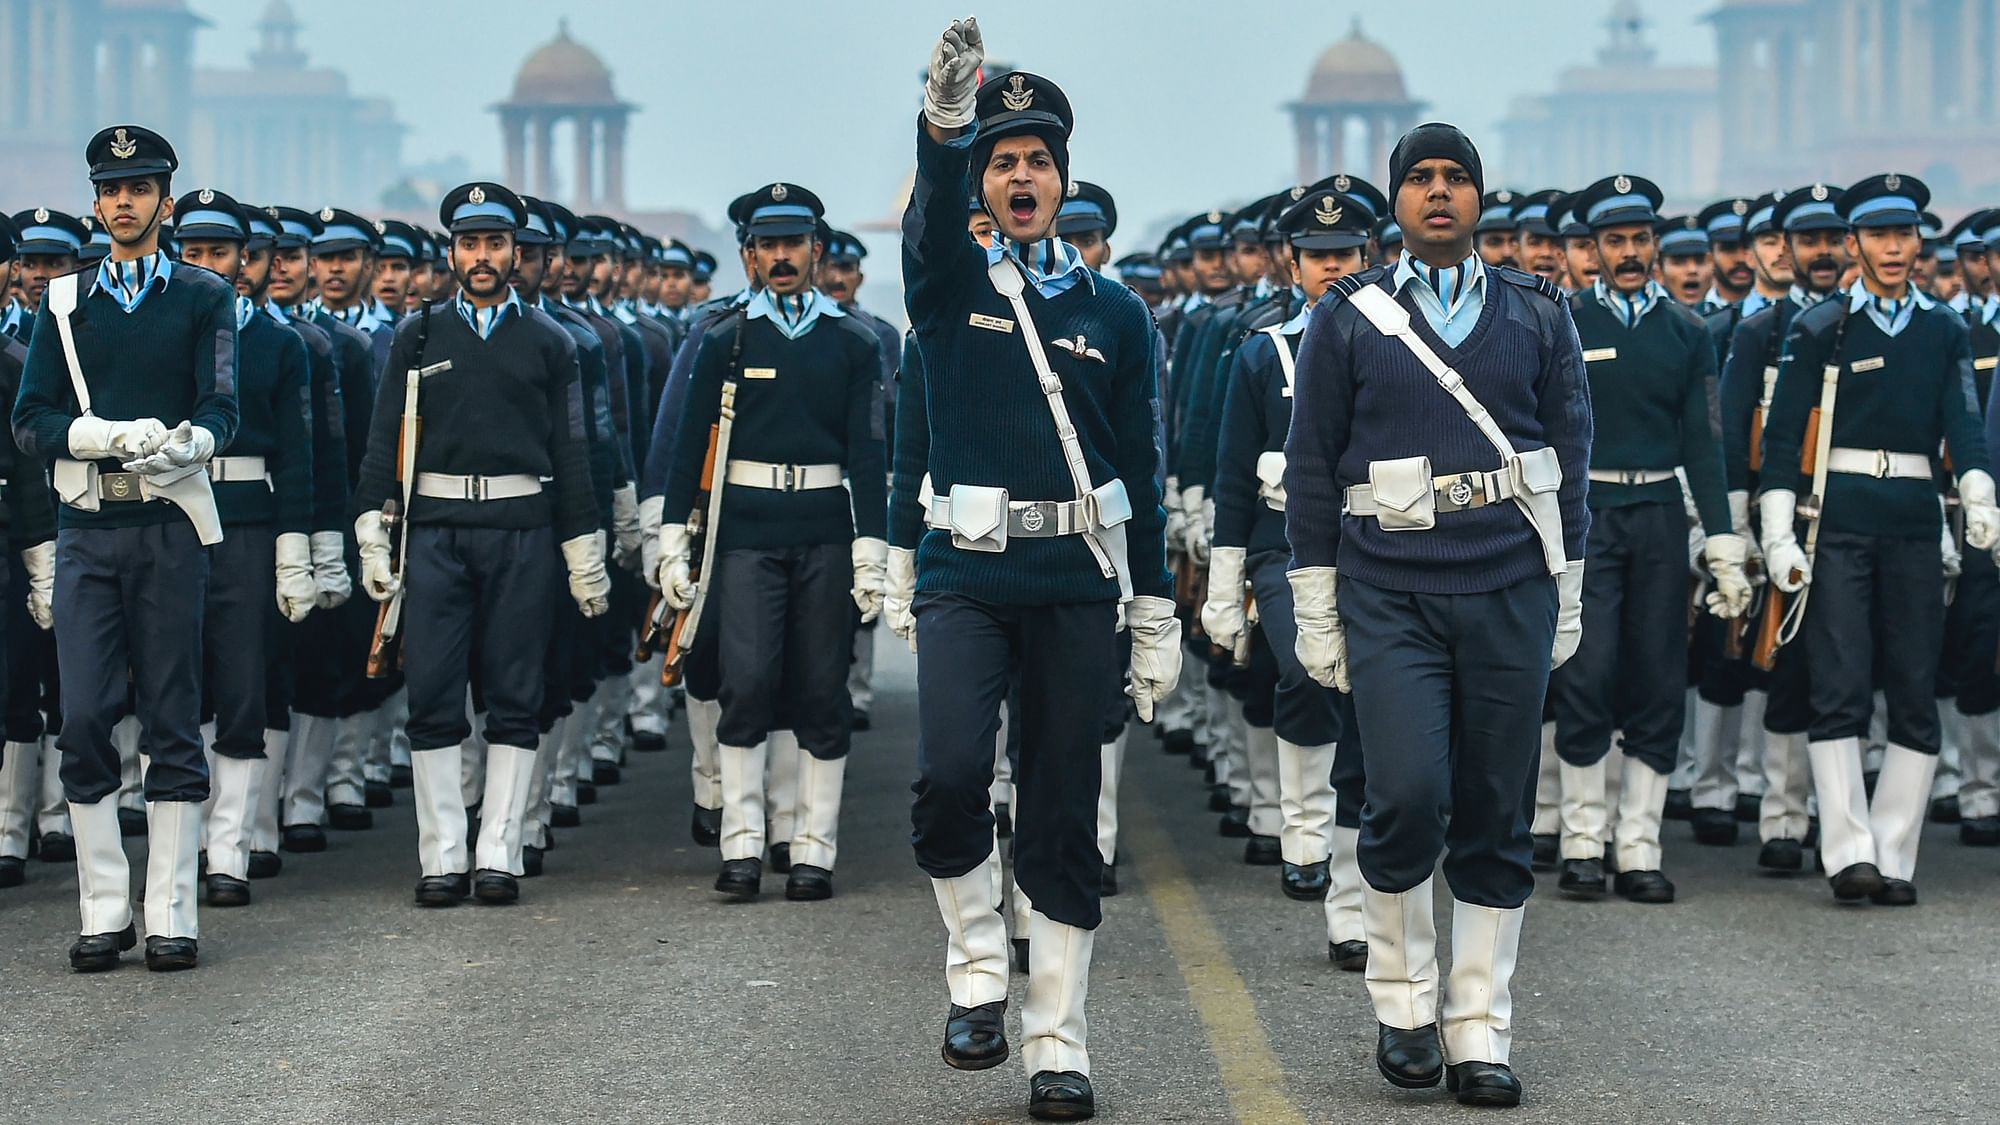 Indian Air Force personnel during the rehearsal for the 2020 Republic Day parade. Image used for representation only.